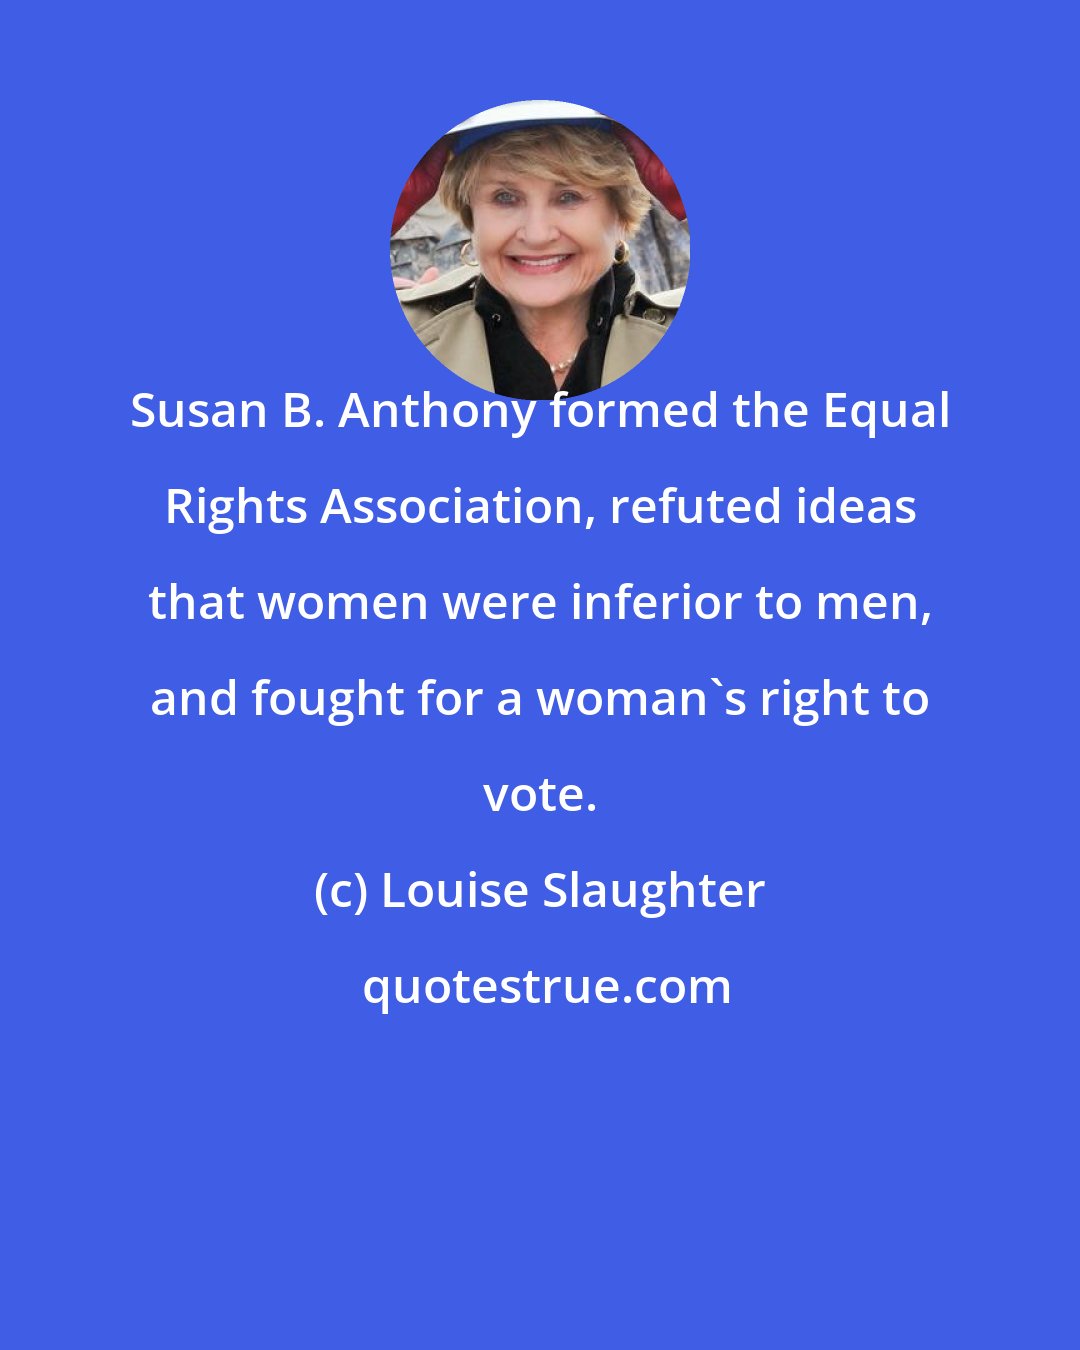 Louise Slaughter: Susan B. Anthony formed the Equal Rights Association, refuted ideas that women were inferior to men, and fought for a woman's right to vote.